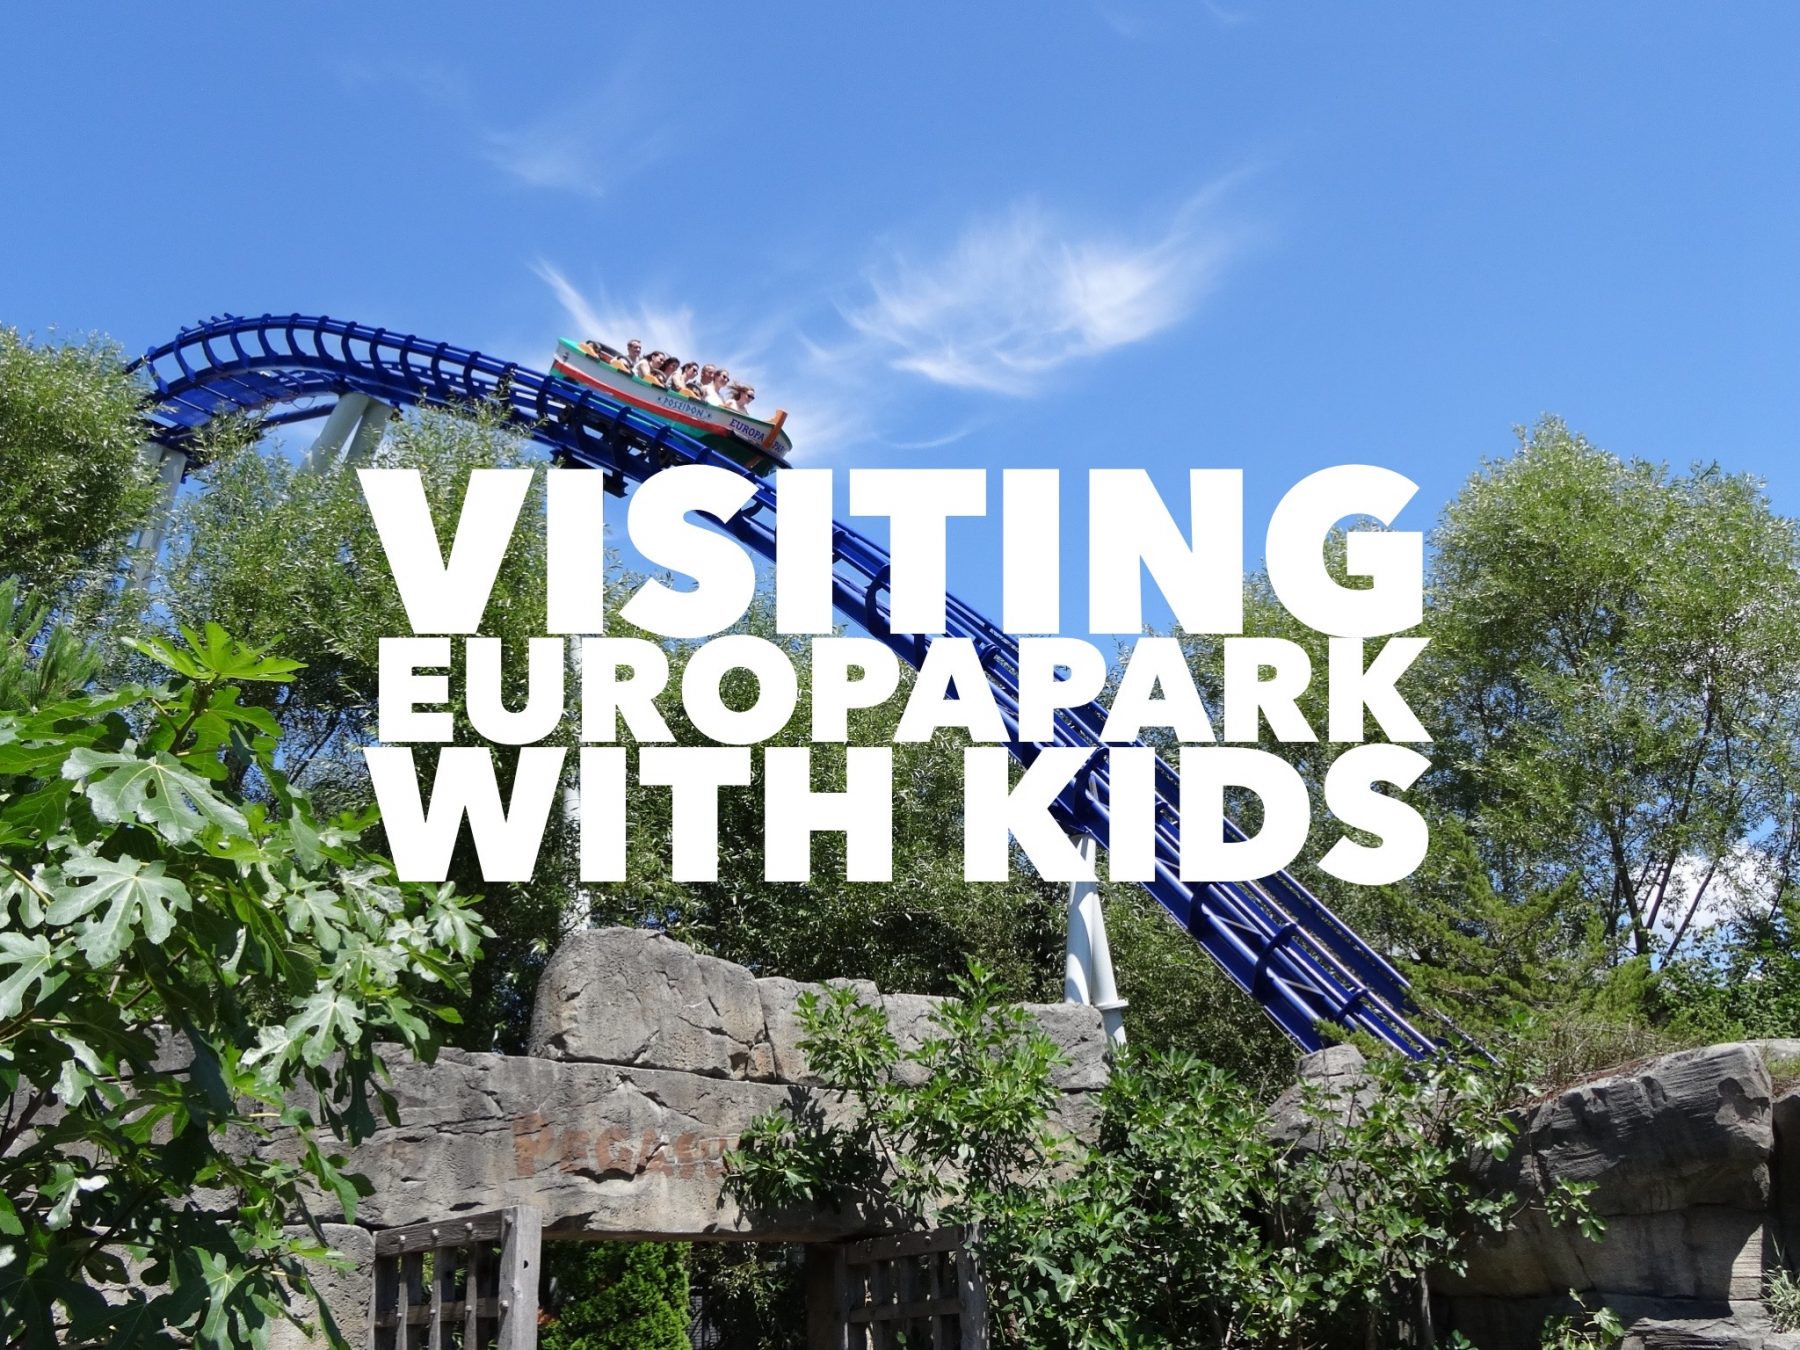 Our Family Review of Europa Park, Germany